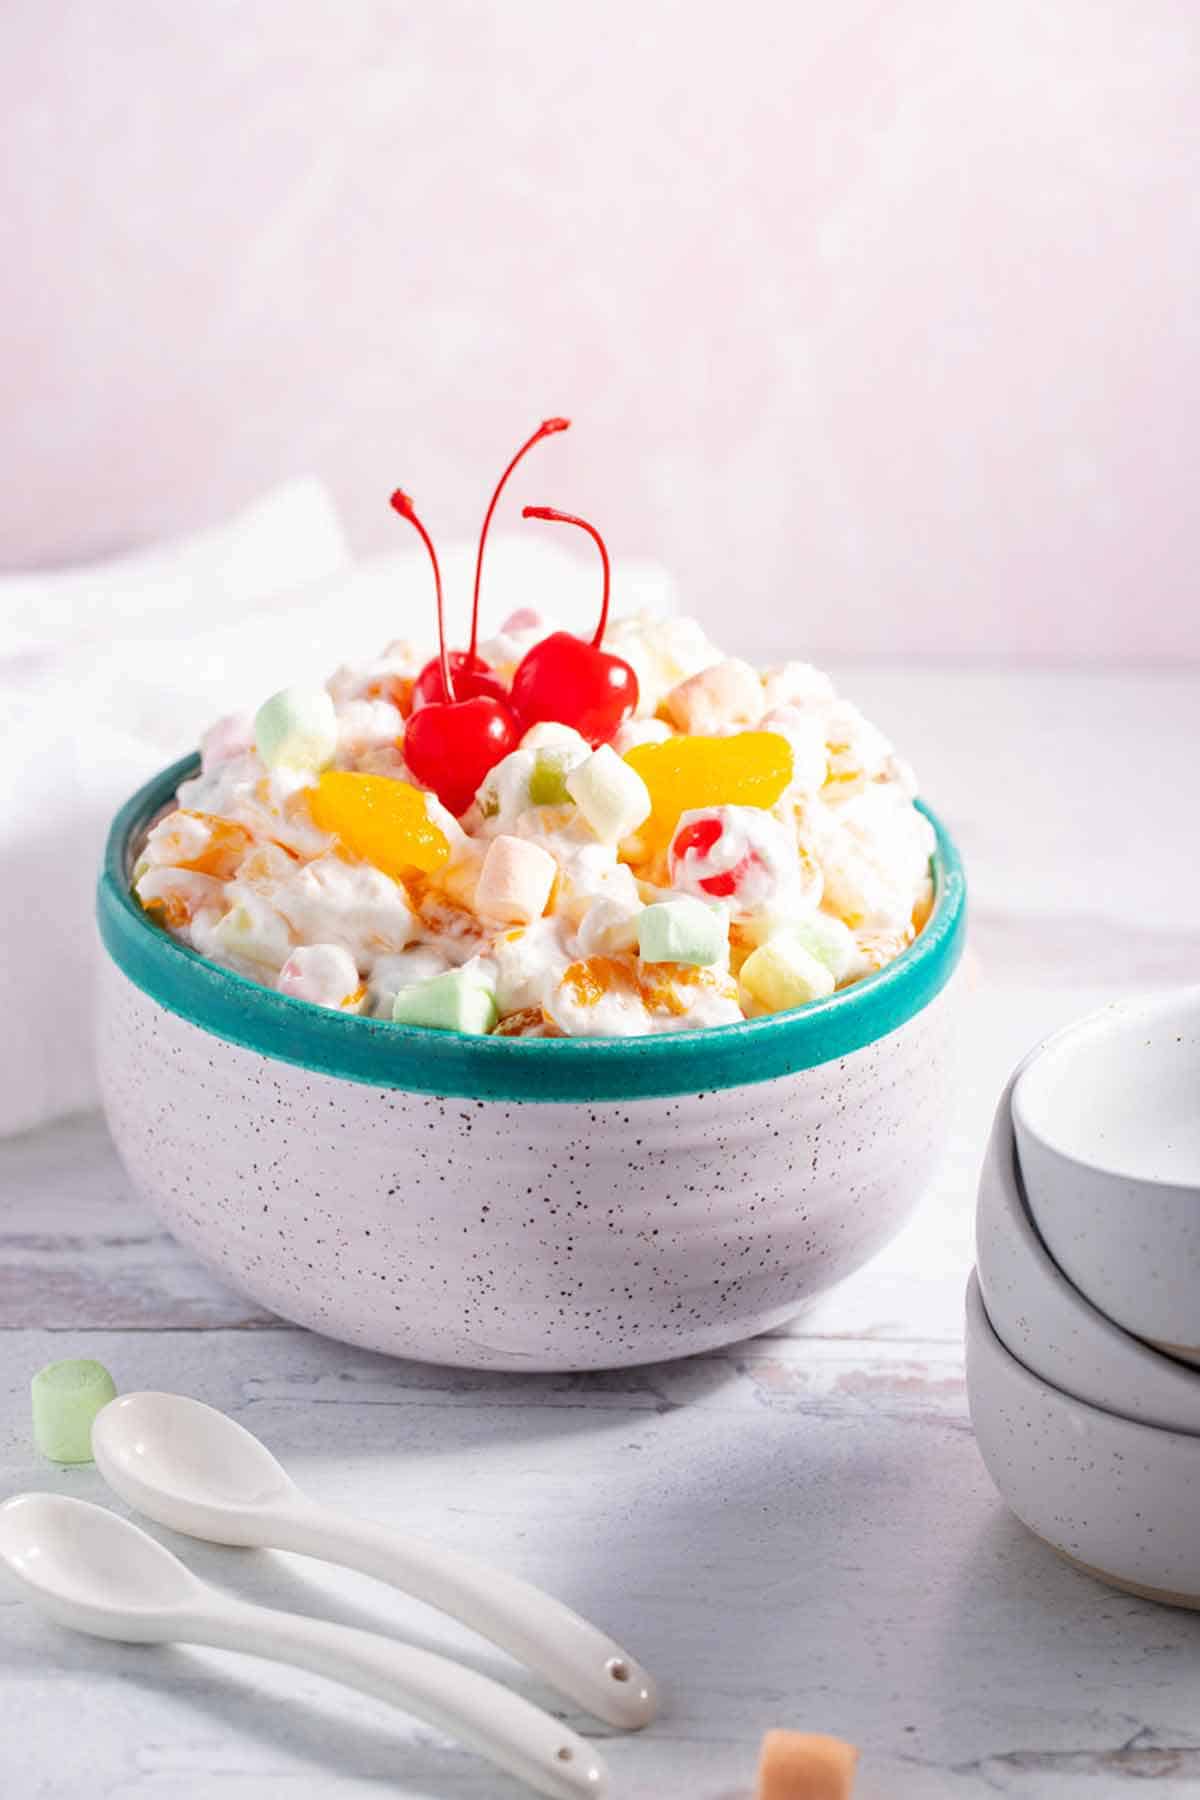 Ambrosia salad with small bowls and spoons next to it.